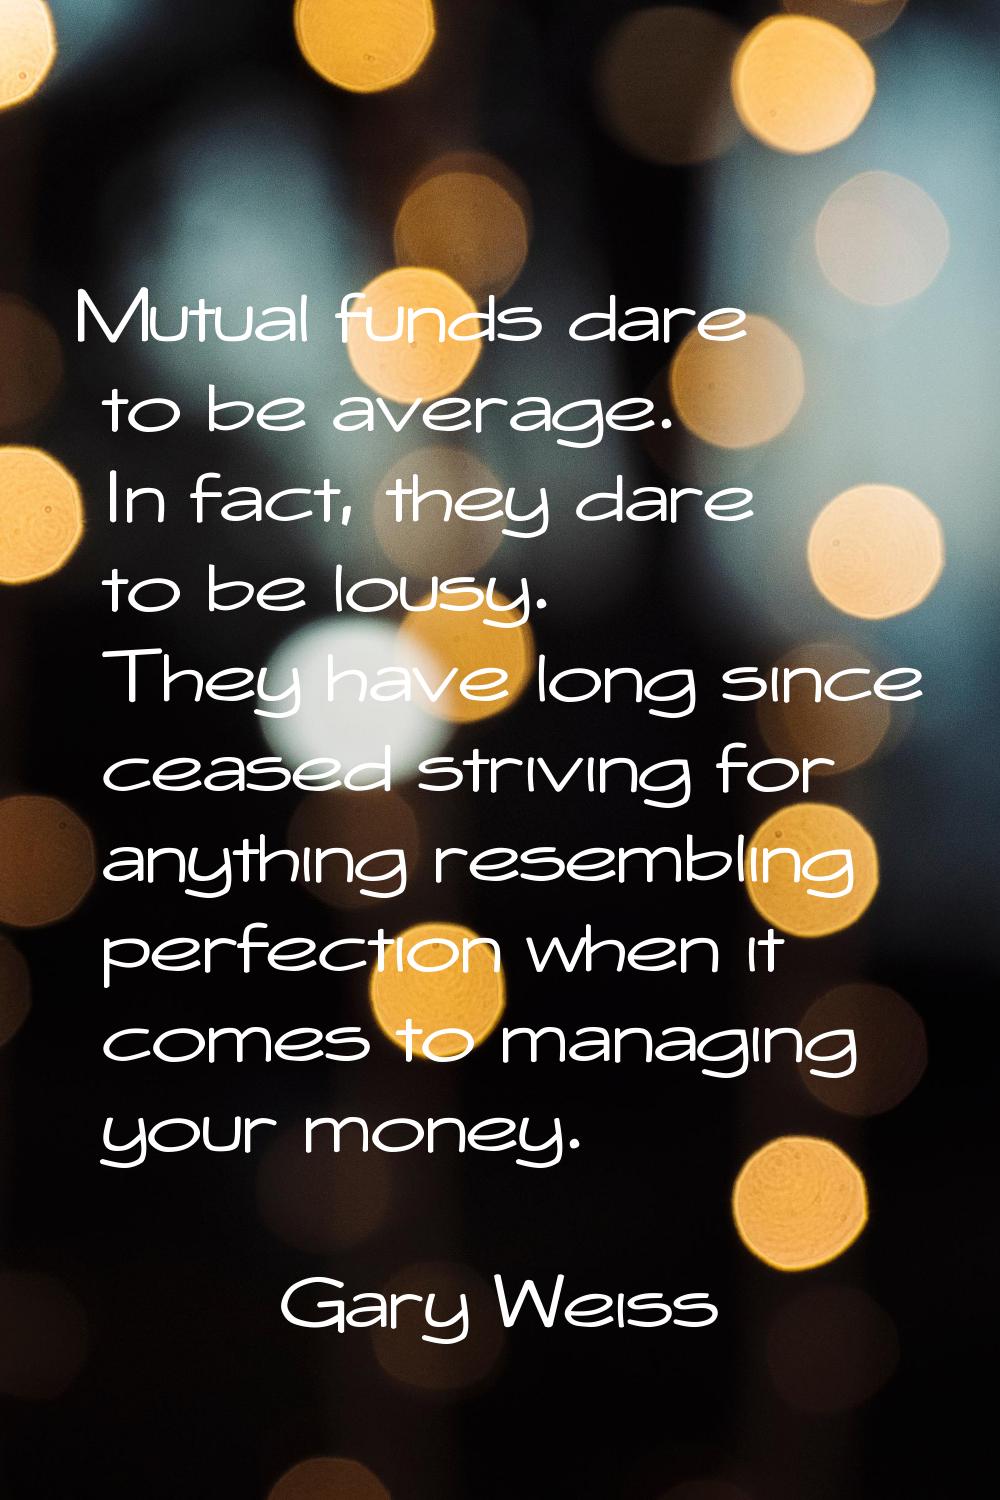 Mutual funds dare to be average. In fact, they dare to be lousy. They have long since ceased strivi